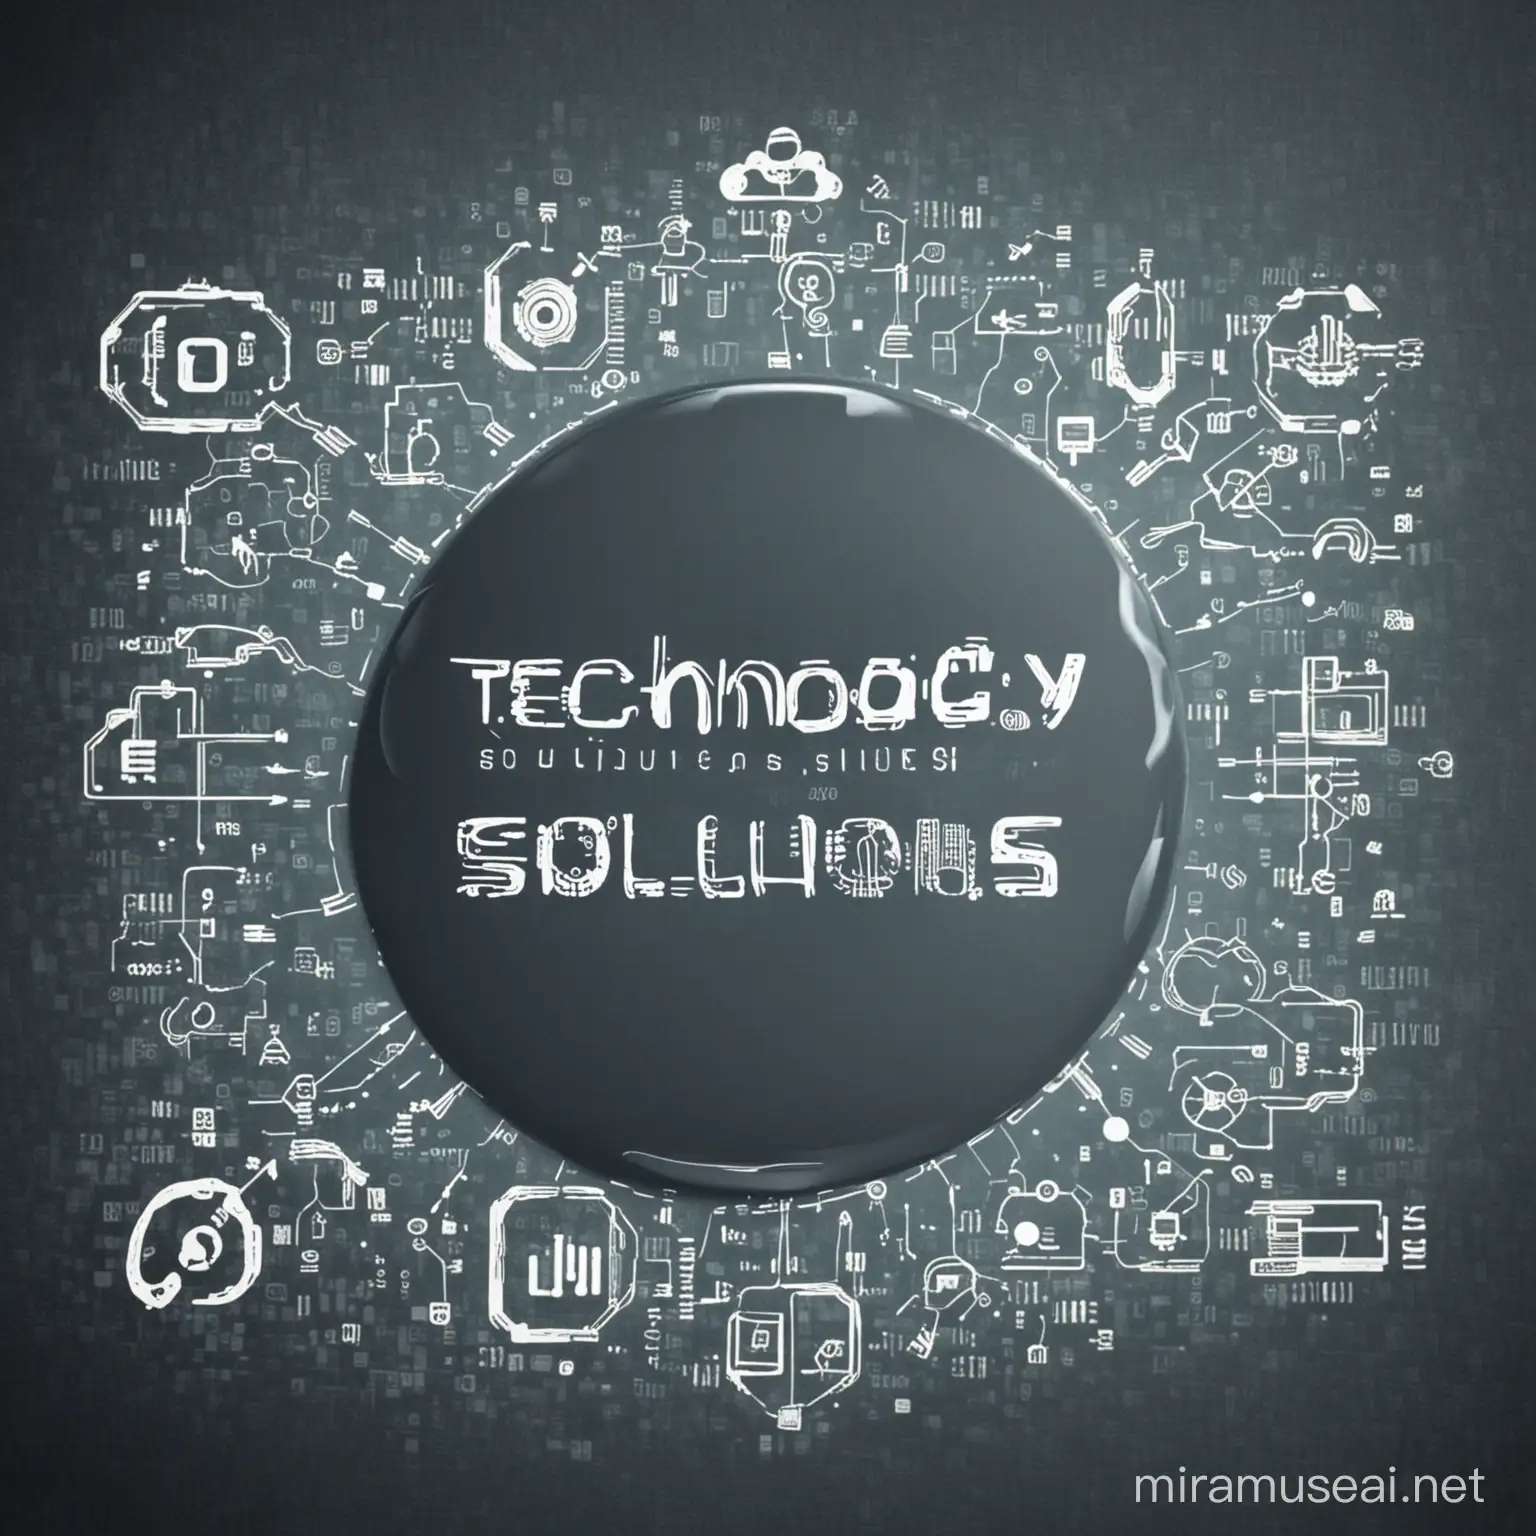 Technology solutions